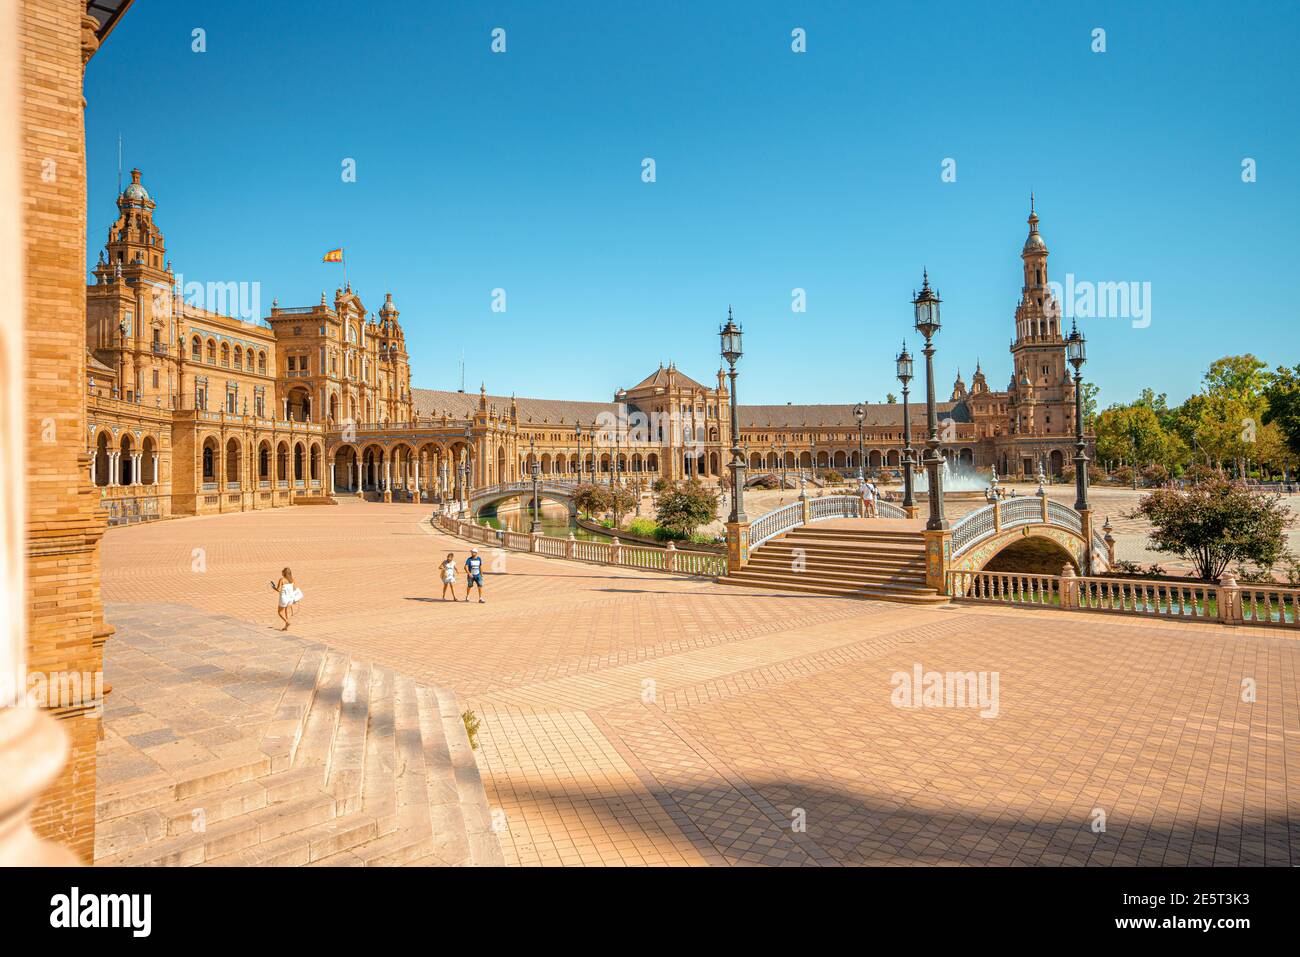 Sevilla, Spain, wide view on the famous landmark Plaza de Espana, day light sunny, blue sky.Architectural details of the palace. Stock Photo